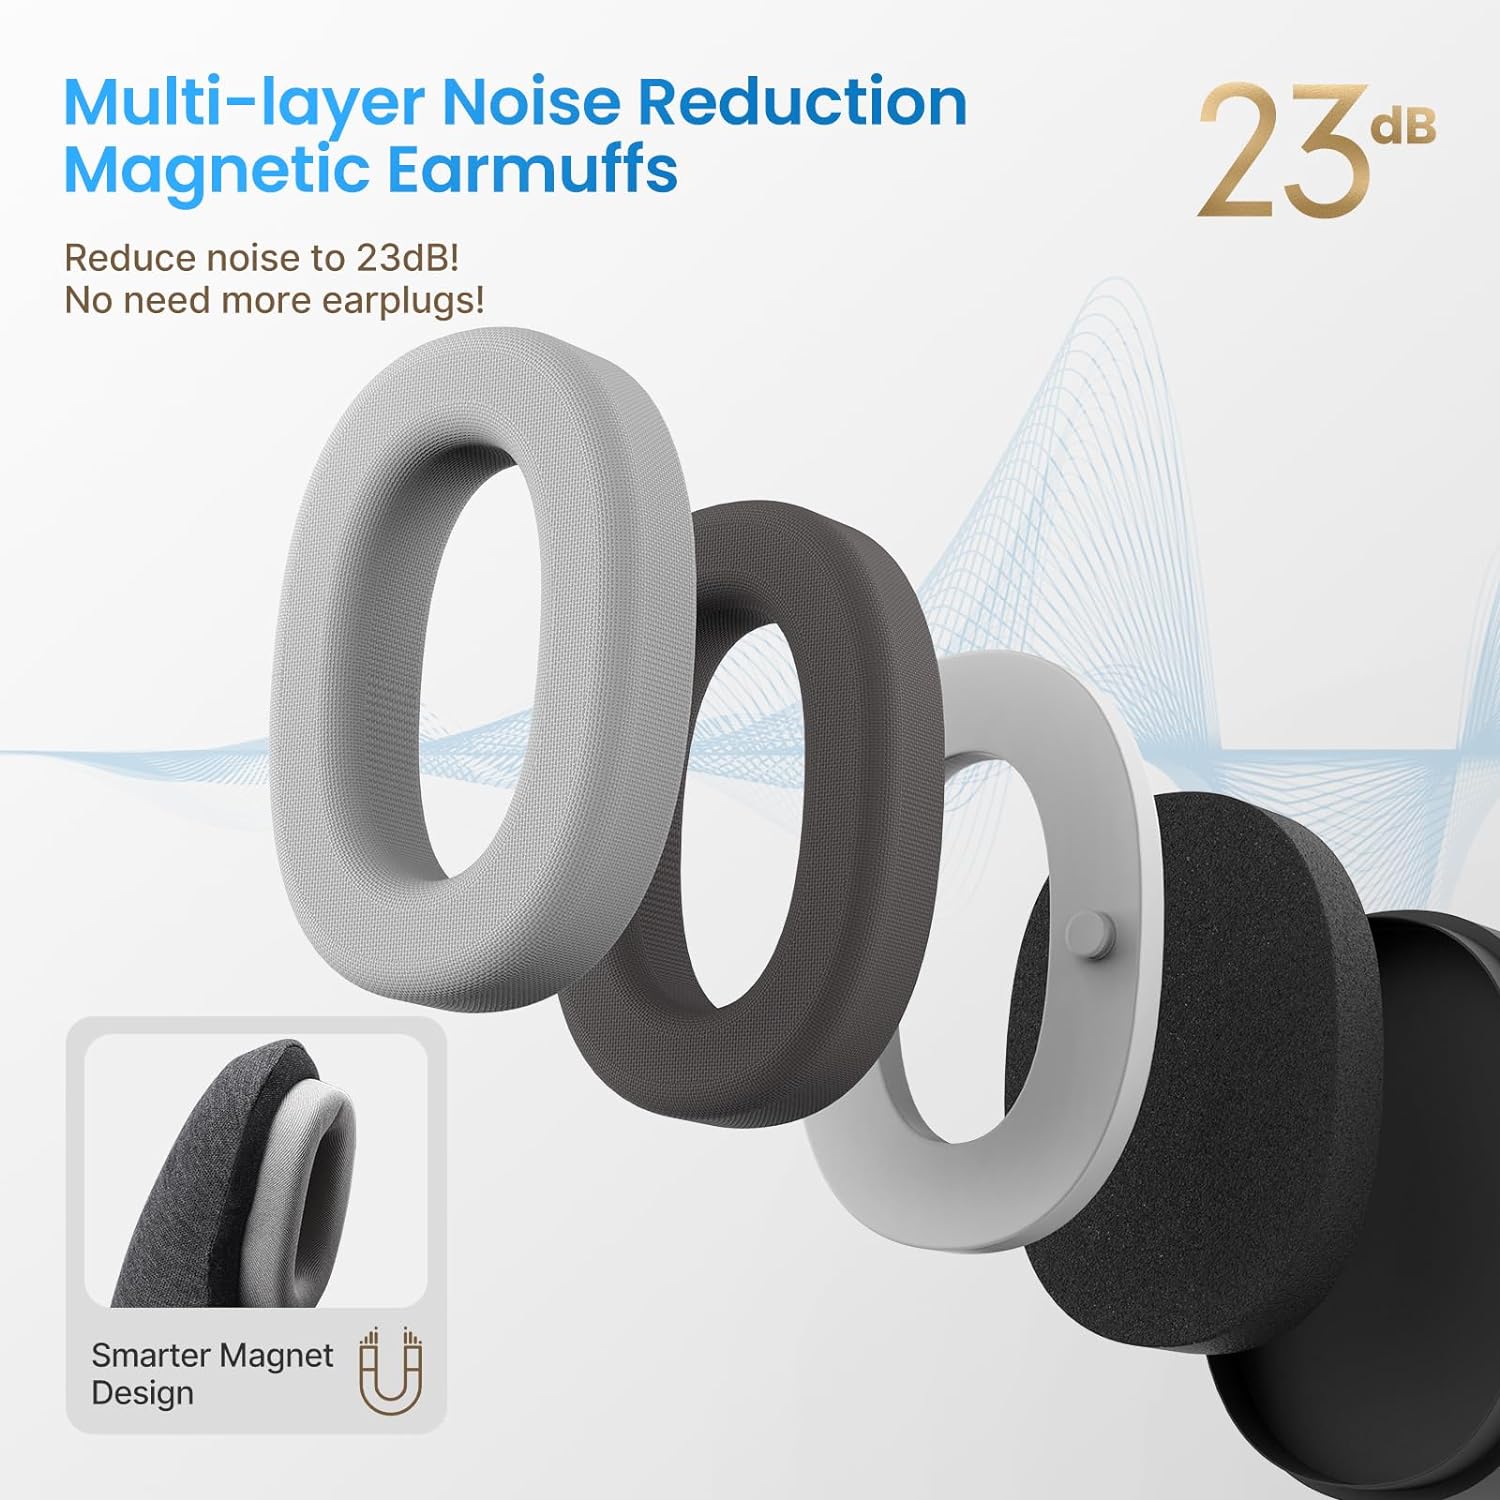 This image shows a design of Renpho EU's RENPHO Neck Pillow, presenting three layers detached and floating apart, to emphasize the product's structure. The text highlights a 23 db noise reduction rating.